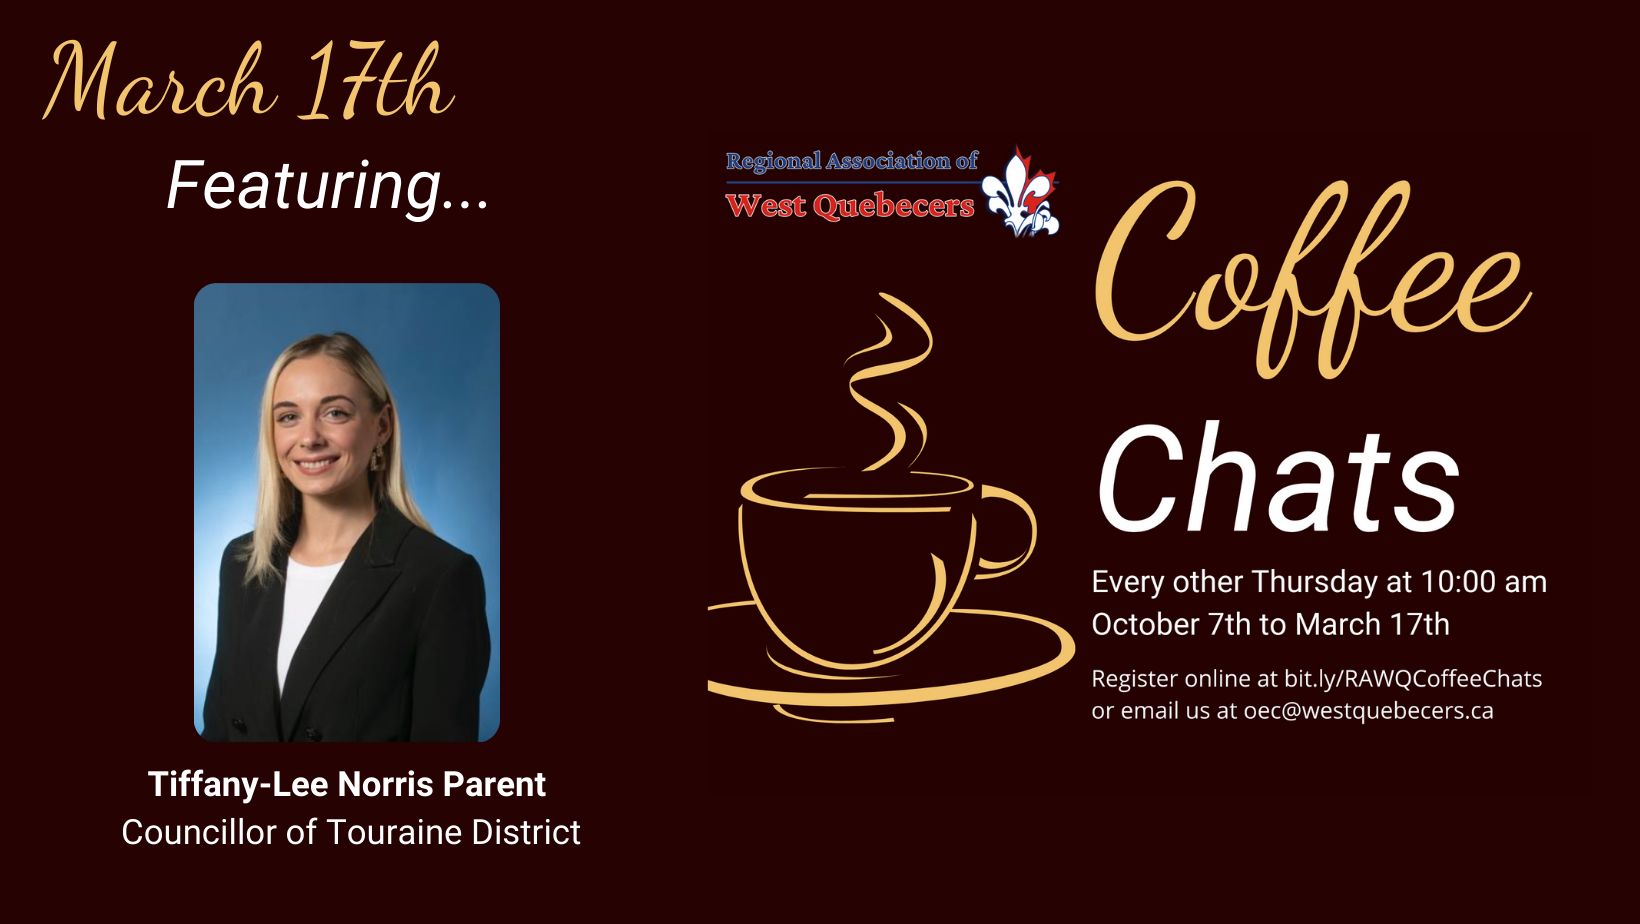 Copy of Coffee Chat 2021 1640 x 924 px v11